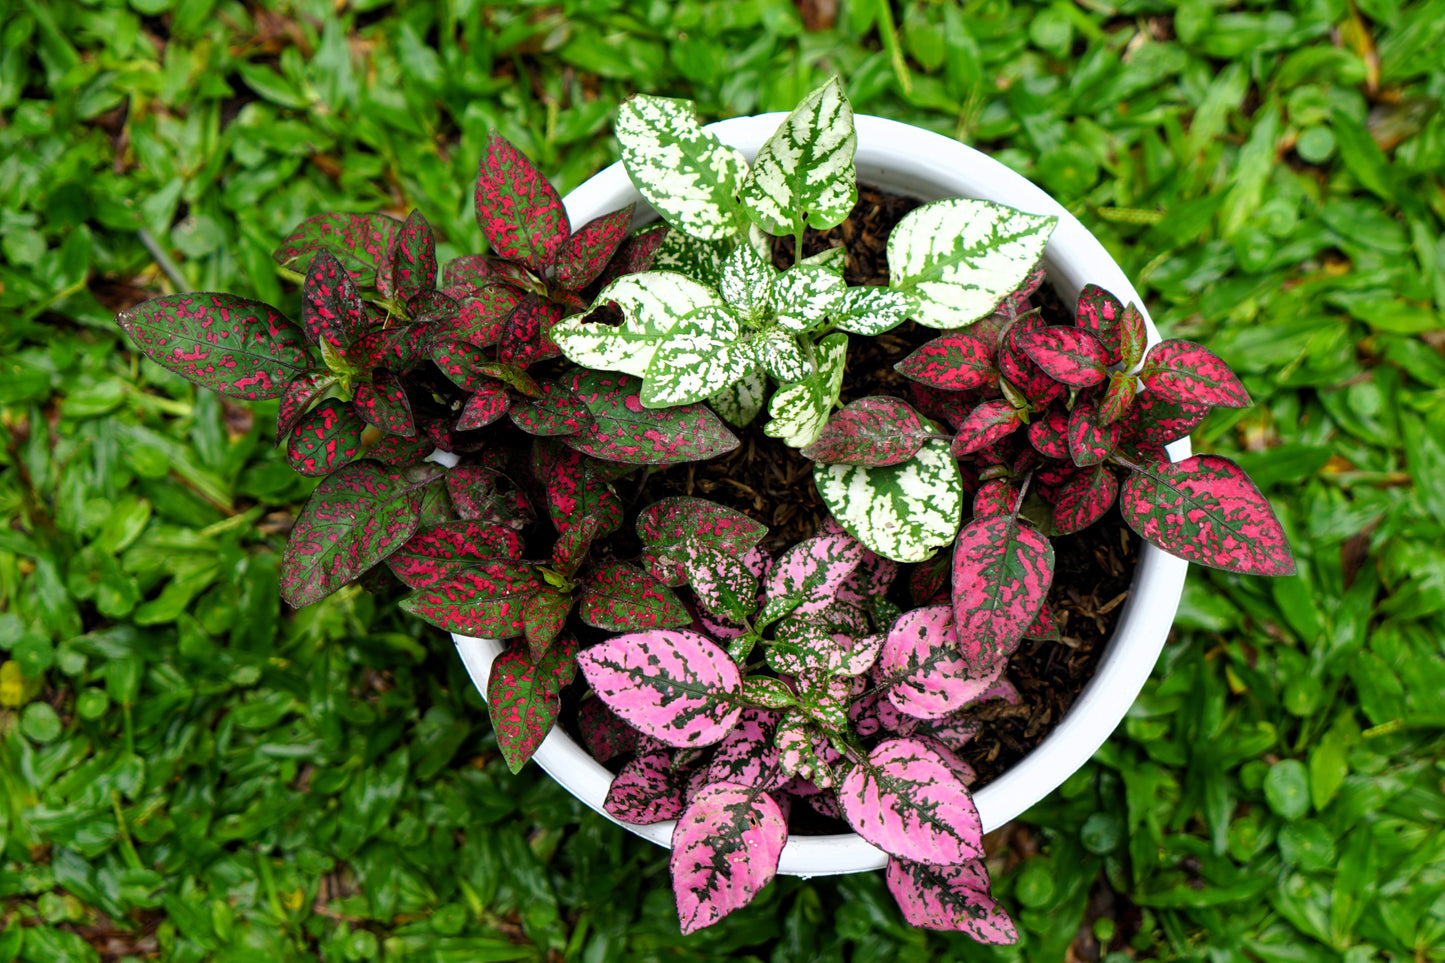 10 Dwarf Mixed Colors POLKA DOT PLANT Red Pink White Rose Splash Select Hypoestes Phyllostachya Flower Houseplant Seeds